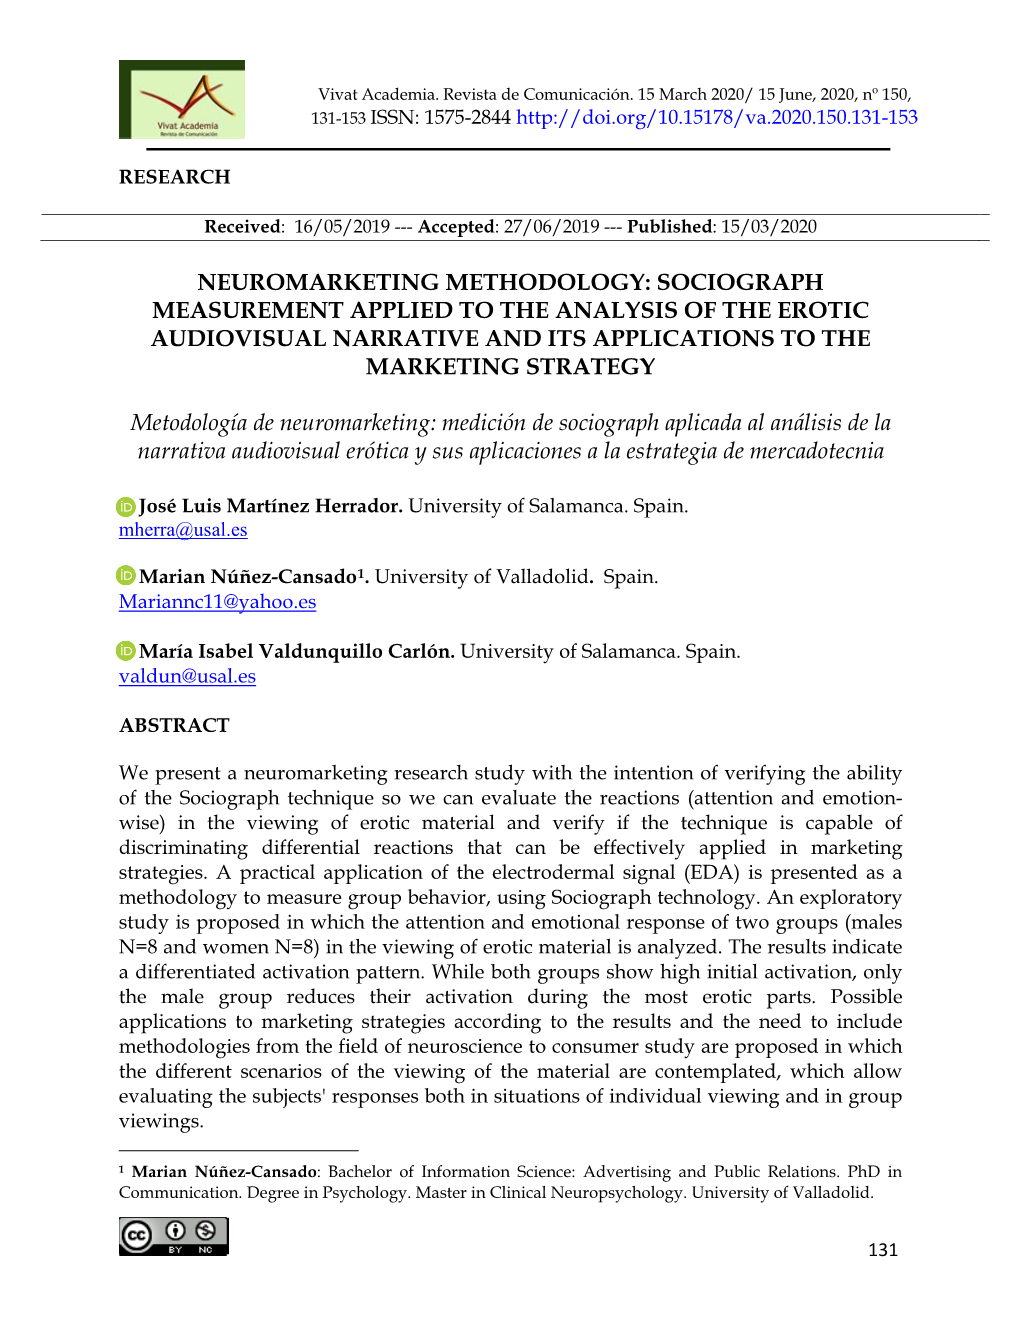 Neuromarketing Methodology: Sociograph Measurement Applied to the Analysis of the Erotic Audiovisual Narrative and Its Applications to the Marketing Strategy